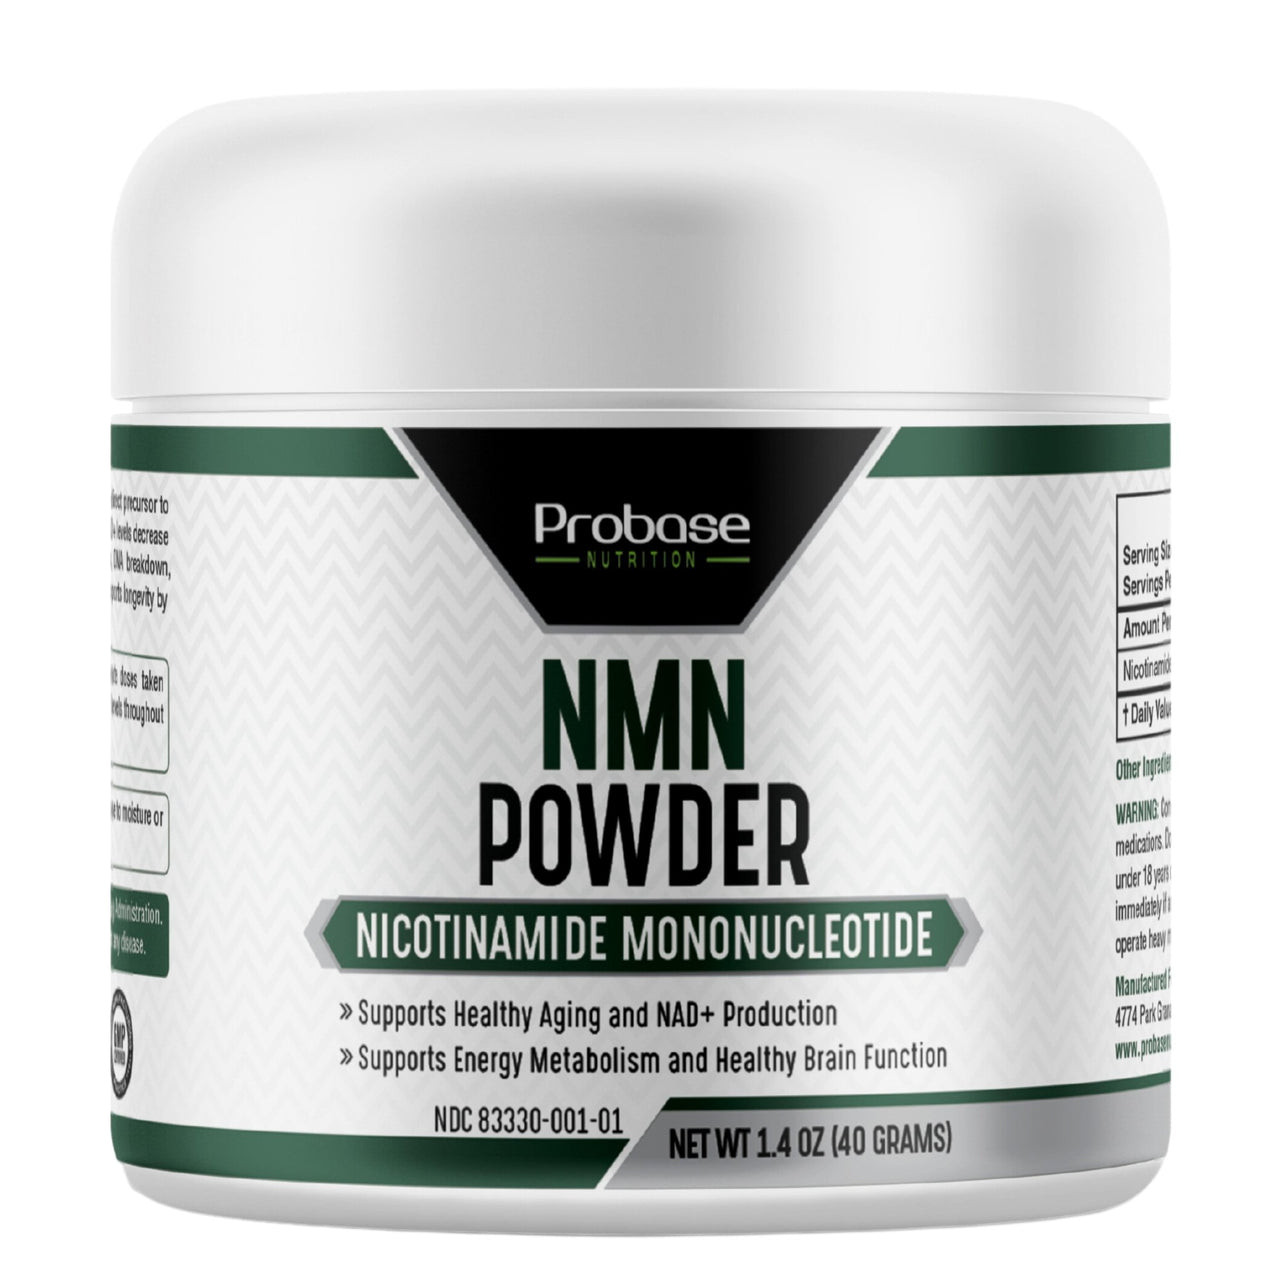 NMN Powder 40 Grams - Over 98% Pure - 40-Day Supply - Probase Nutrition